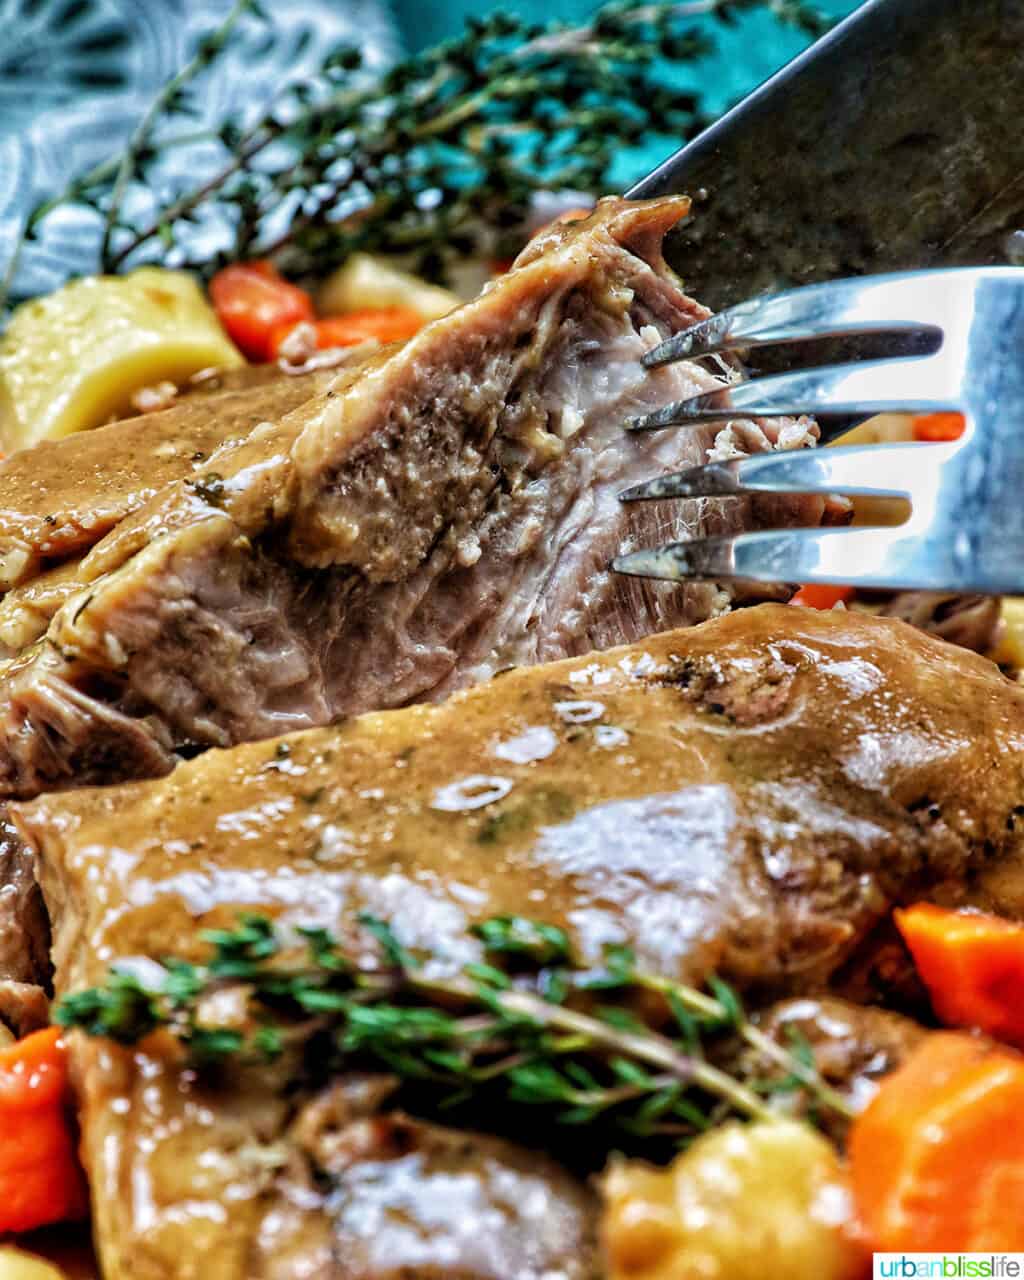 fork and knife holding up a slice of Instant Pot pork roast with potatoes, carrots and herbs.